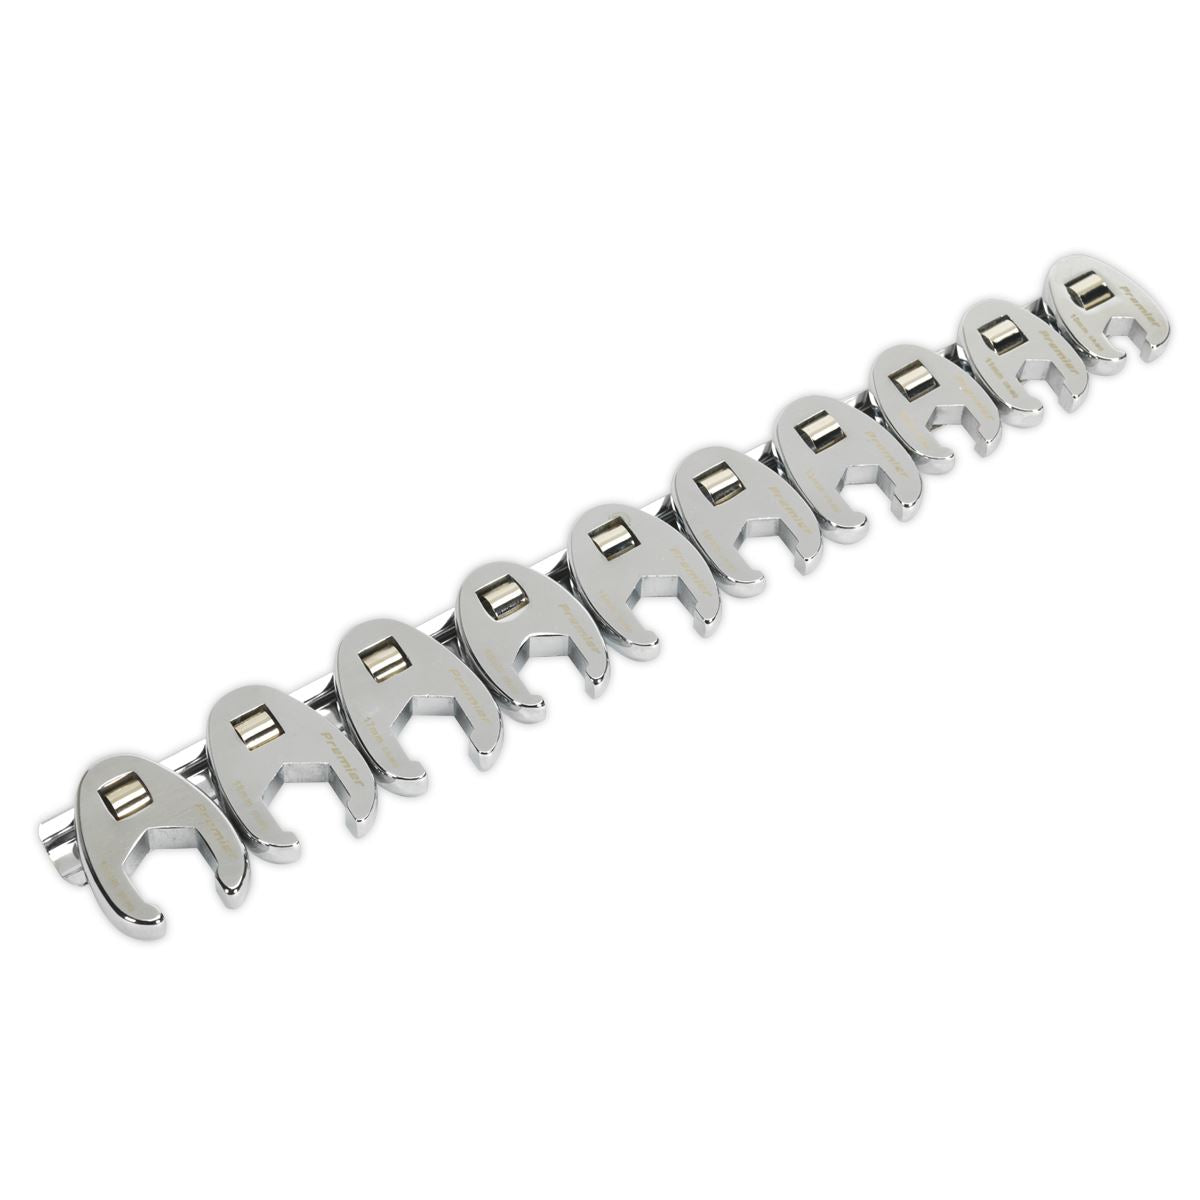 Sealey 10 Piece 3/8" Drive Metric Crow Foot Spanner Set 10-19mm Crows Feet